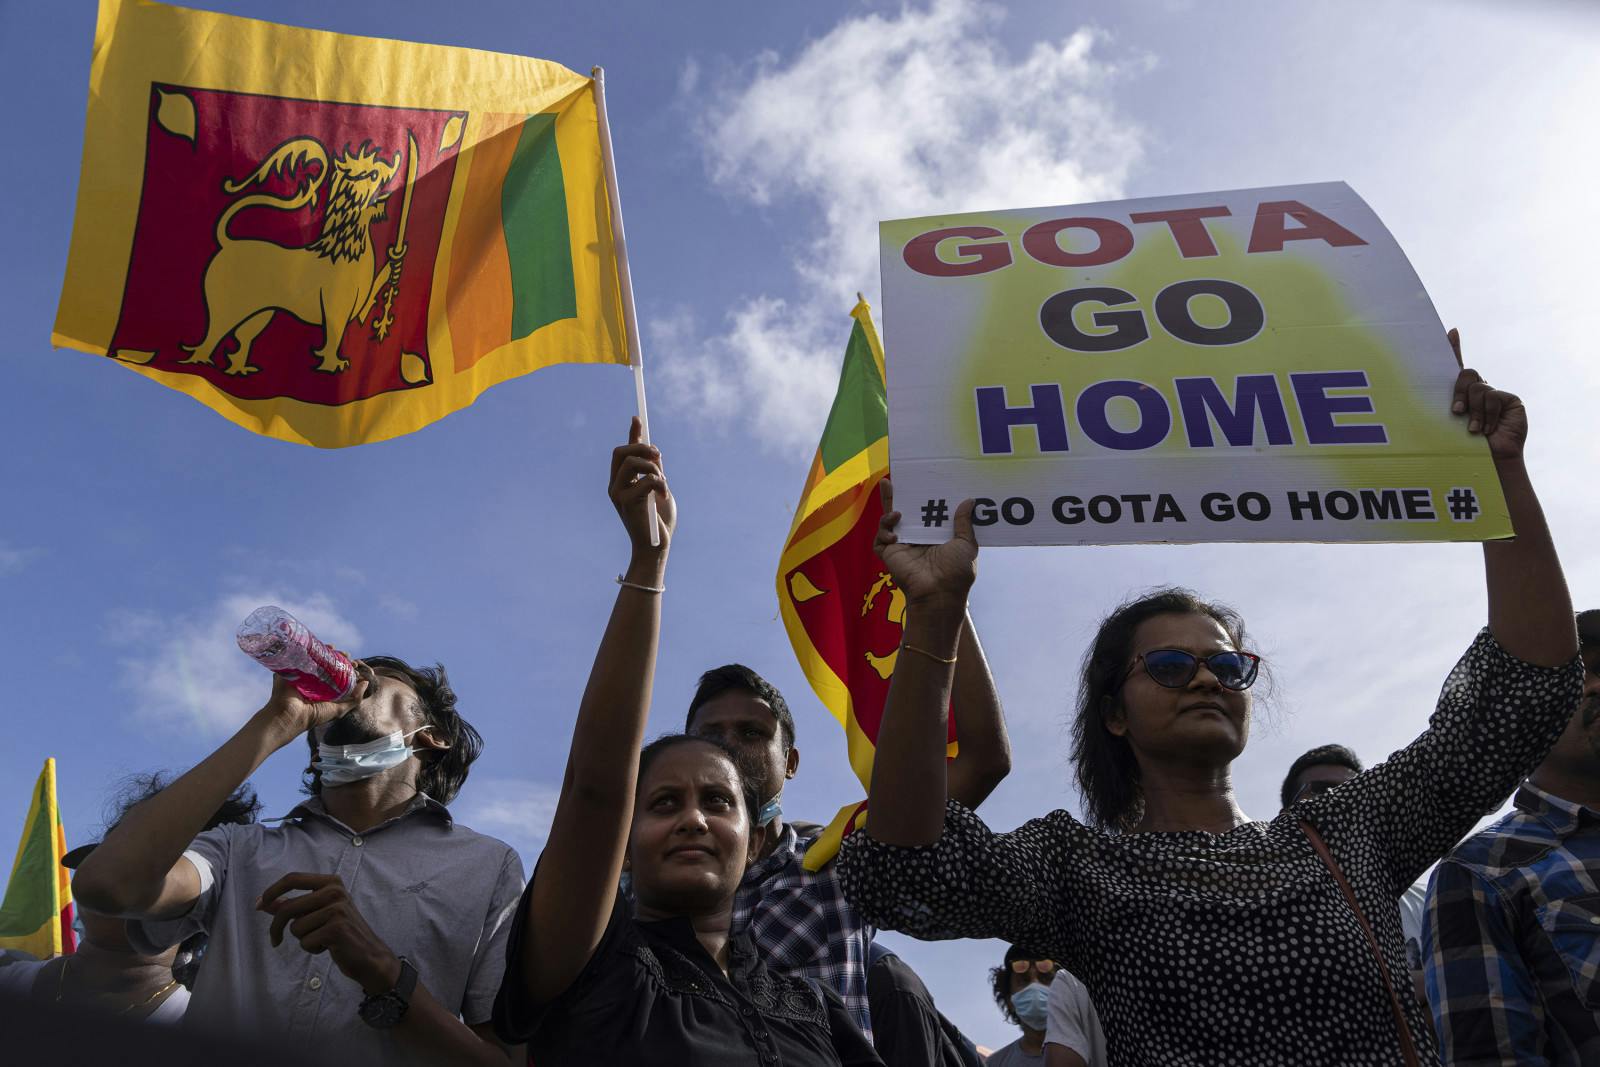 COLOMBO, SRI LANKA - APRIL 23: Demonstrator hold a placard while he takes part in a protest against Sri Lankan President Gotabaya Rajapaksa at protest camp site on April 23, 2022 in Colombo, Sri Lanka (Buddhika Weerasinghe/Getty Images)